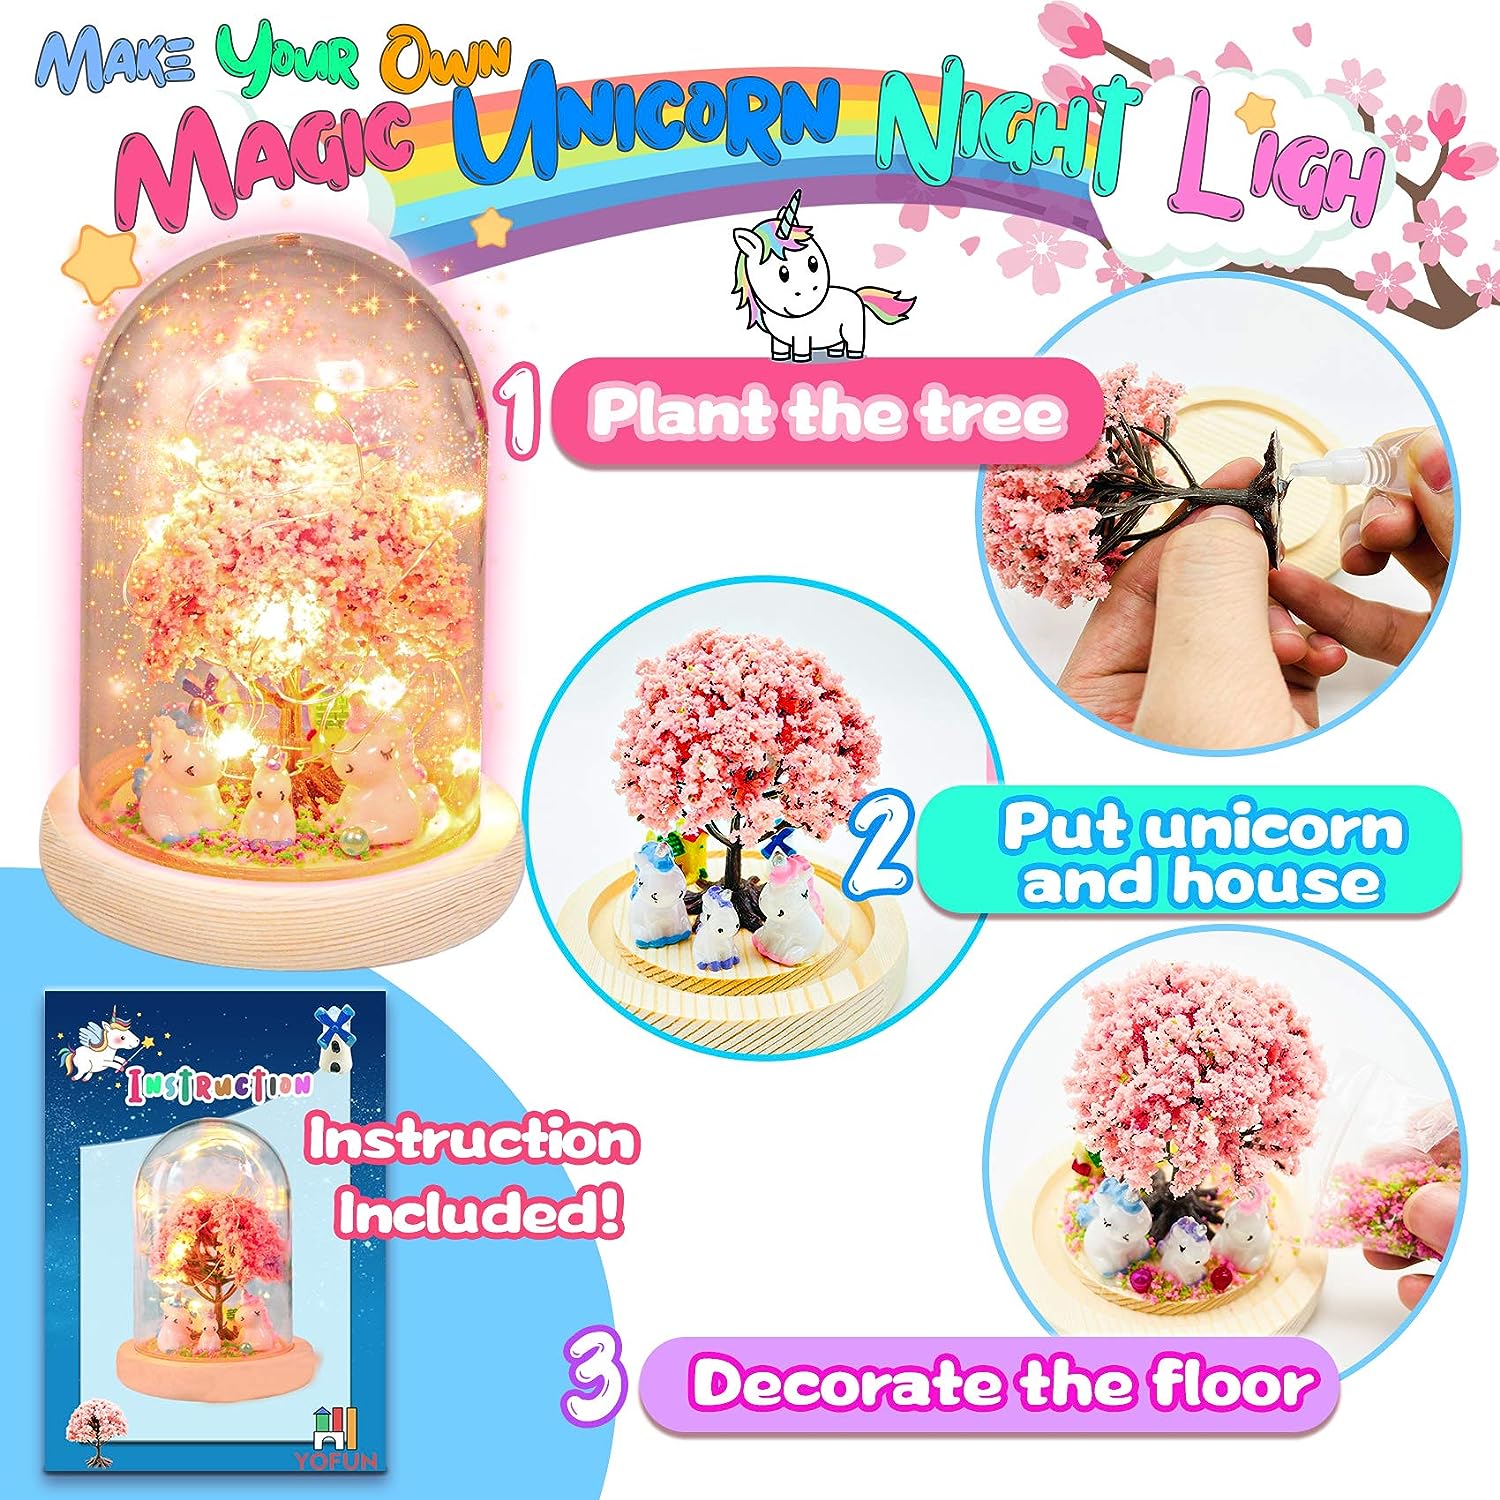 YOFUN Make Your Own Unicorn Night Light - Unicorn Craft Kit for Kids, Arts and Crafts Nightlight Project Novelty for Girl Age 4 to 9 Year Old, Unicorns Gifts for Girls